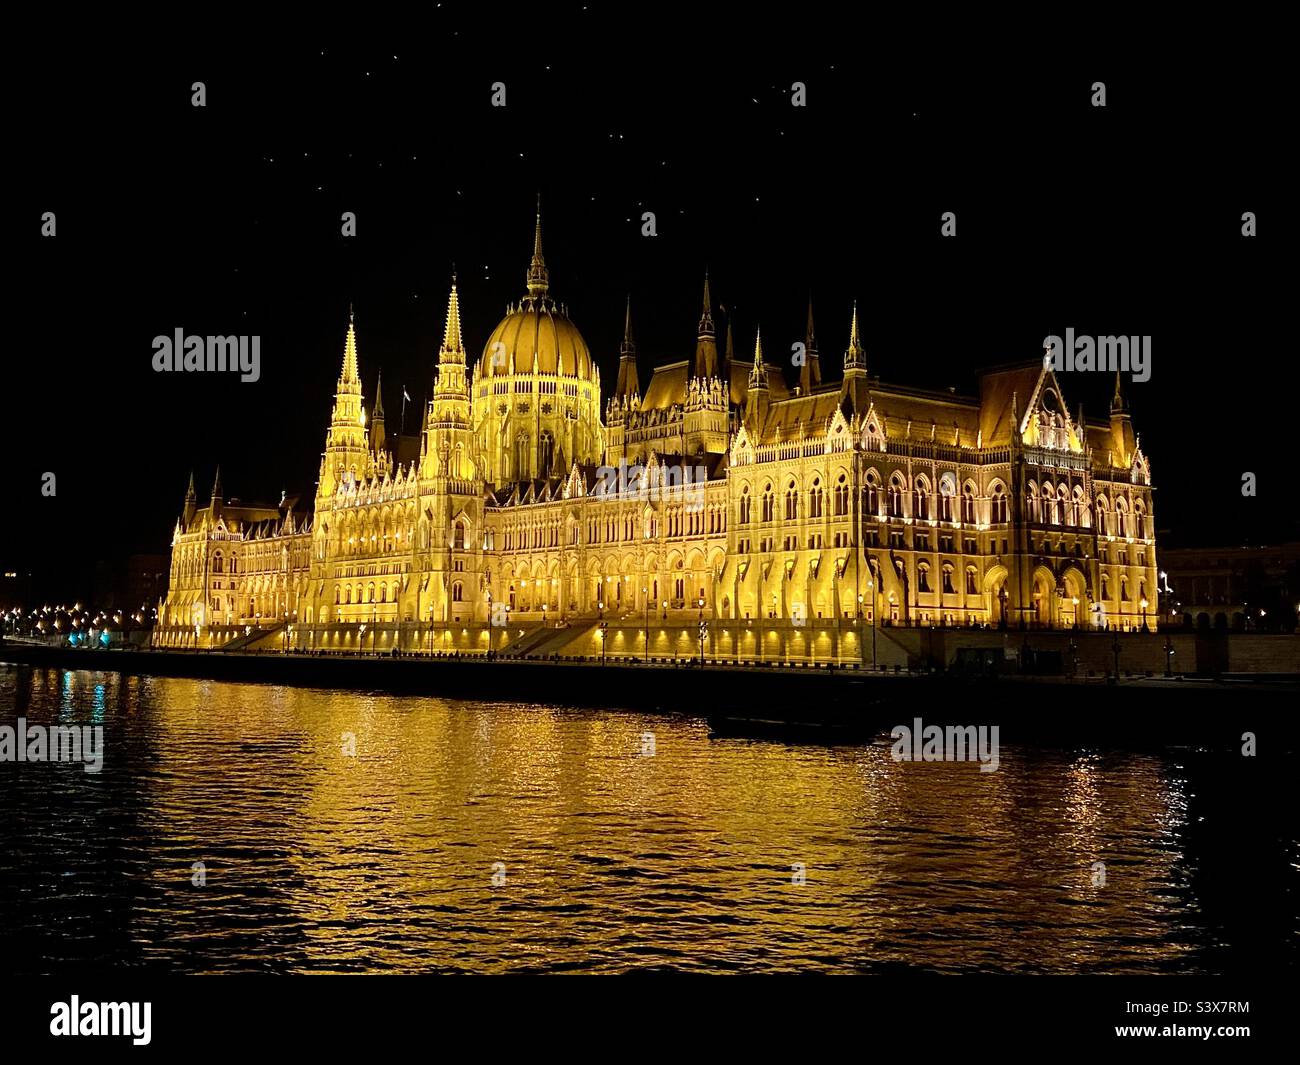 The Parliament building in Budapest in Hungary illuminated at night viewed from the river Danube Stock Photo